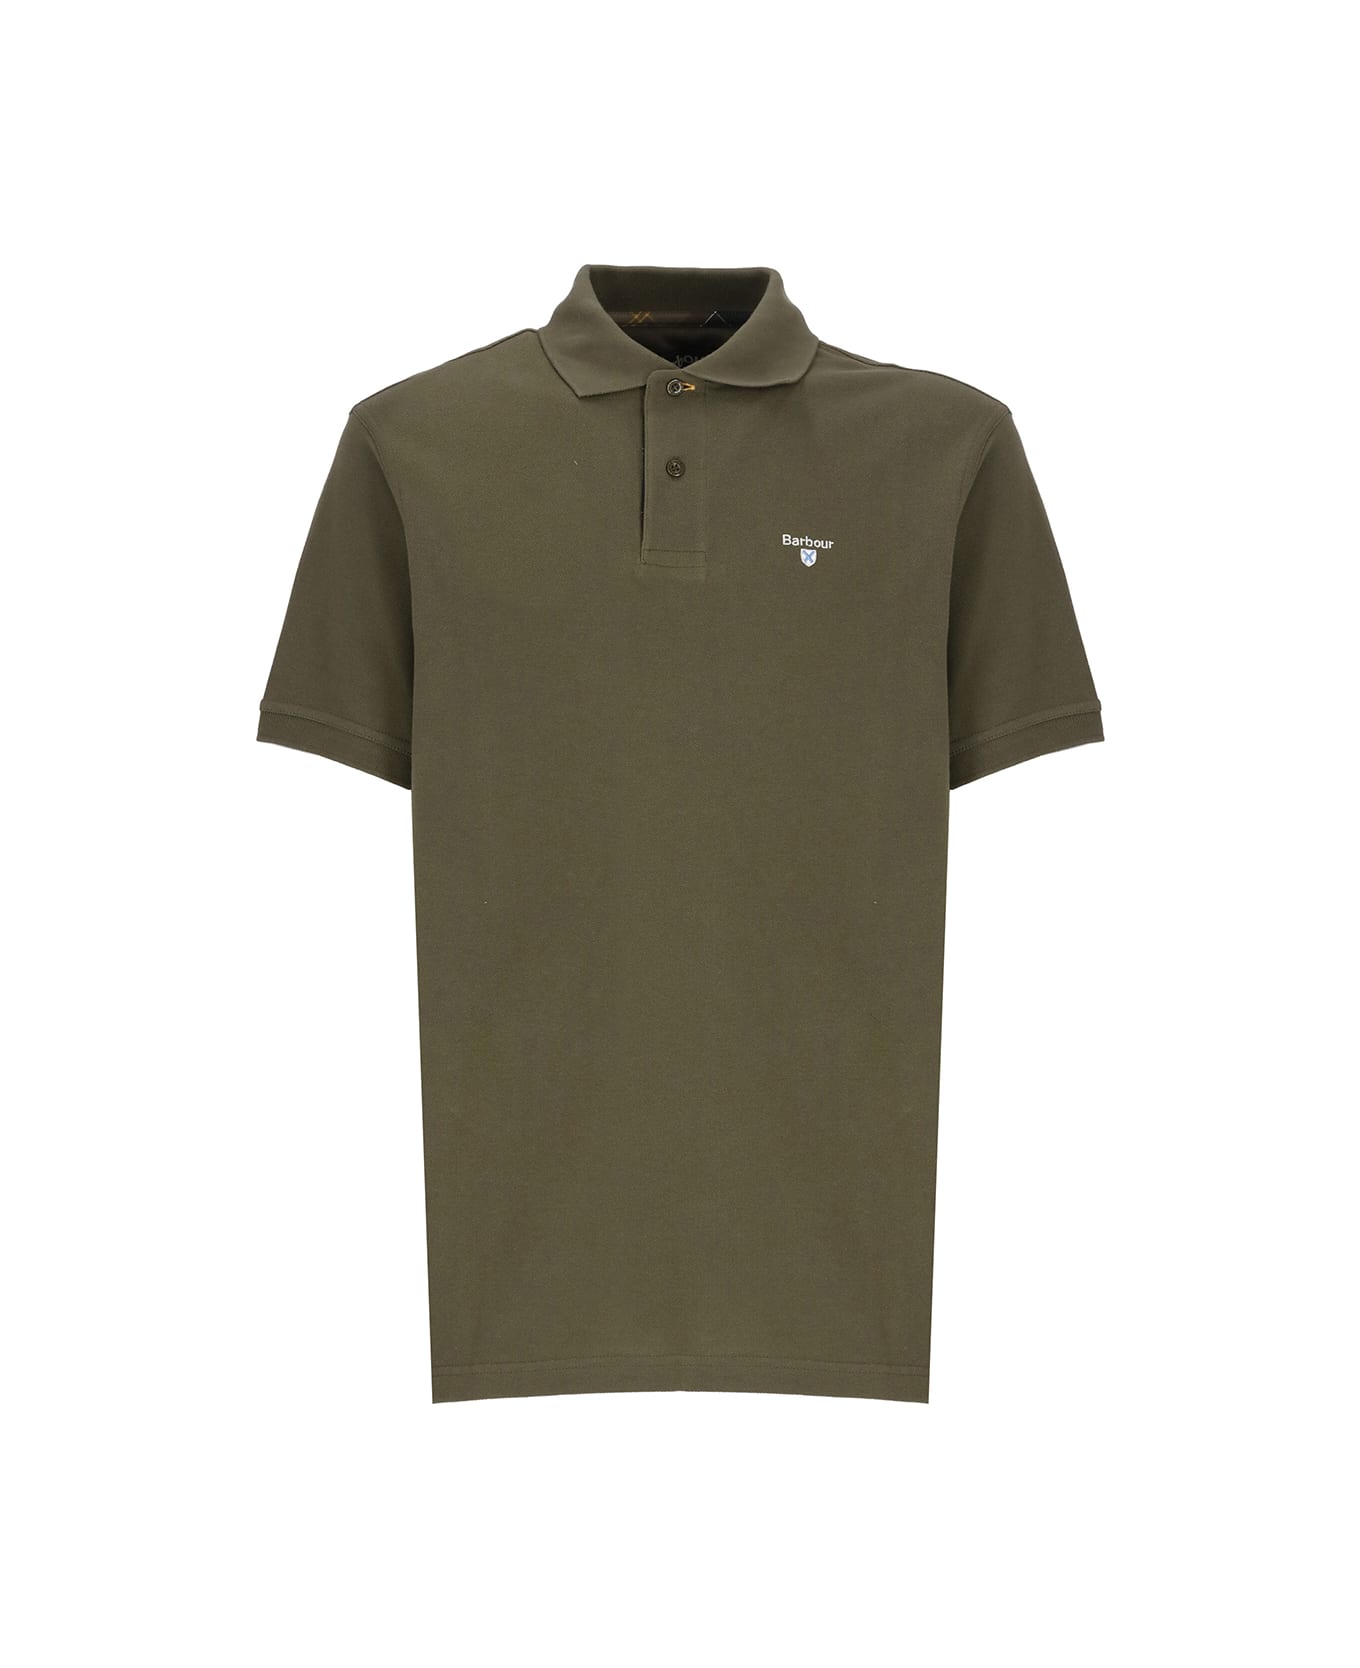 Barbour Logoed Polo Shirt - Green ポロシャツ